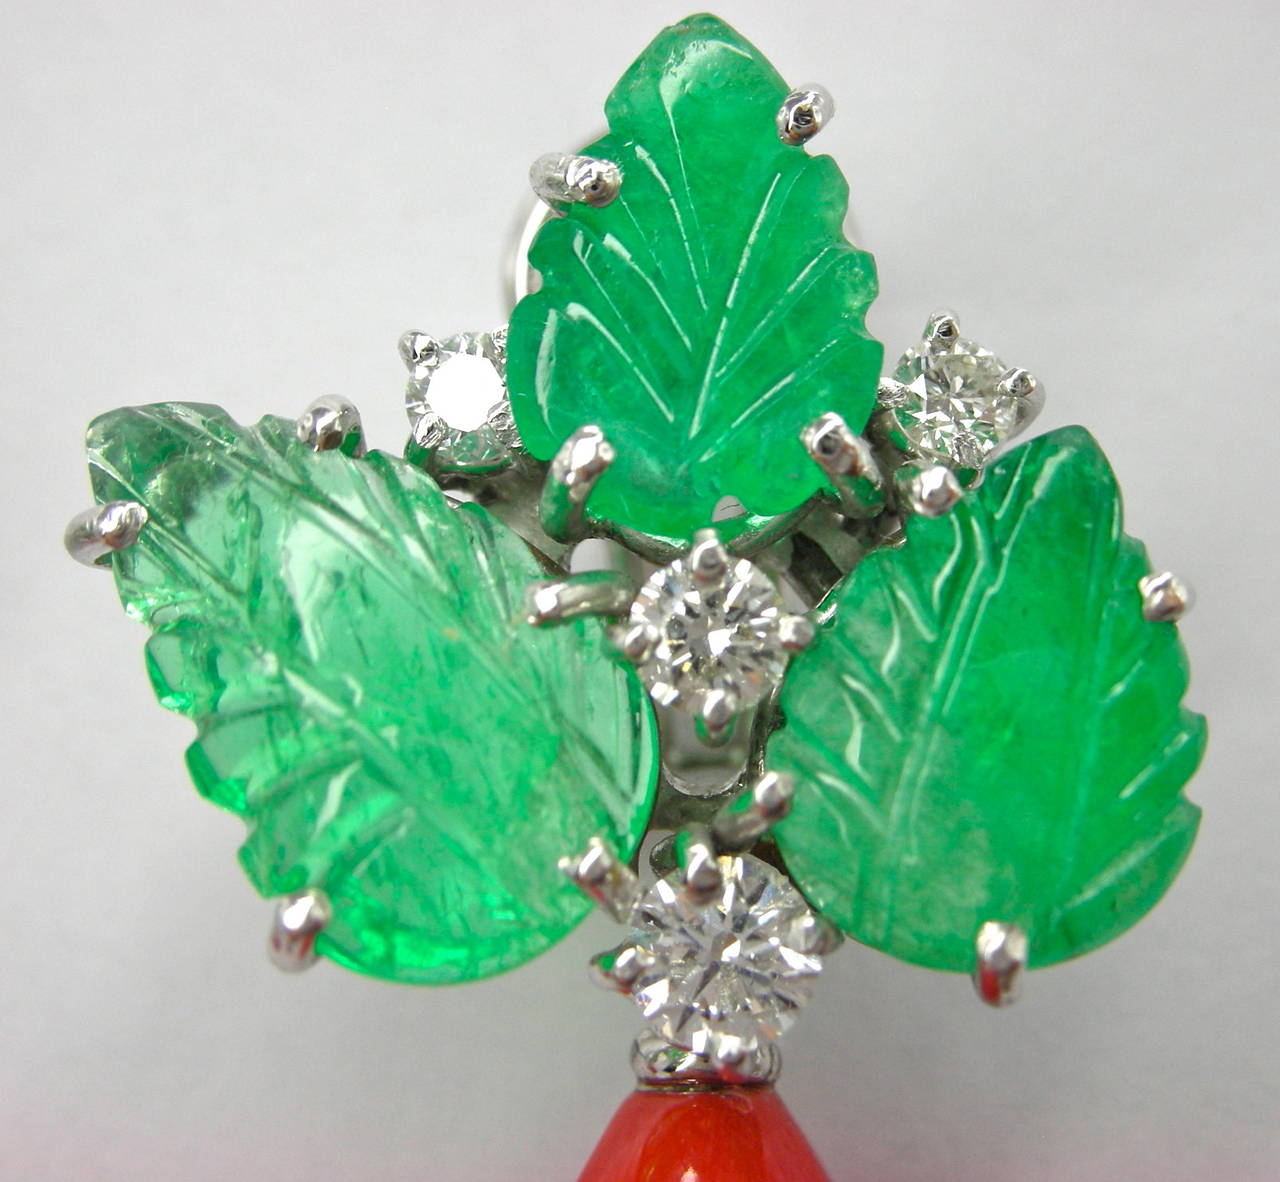 Pair of important Earrings featuring  Mediterranean warm red coral drops, engraved emerald leaves weighing 10.06 carats and 0.75 carats of brilliant cut diamonds mounted in 18k white gold. Hand crafted in Italy by Jona